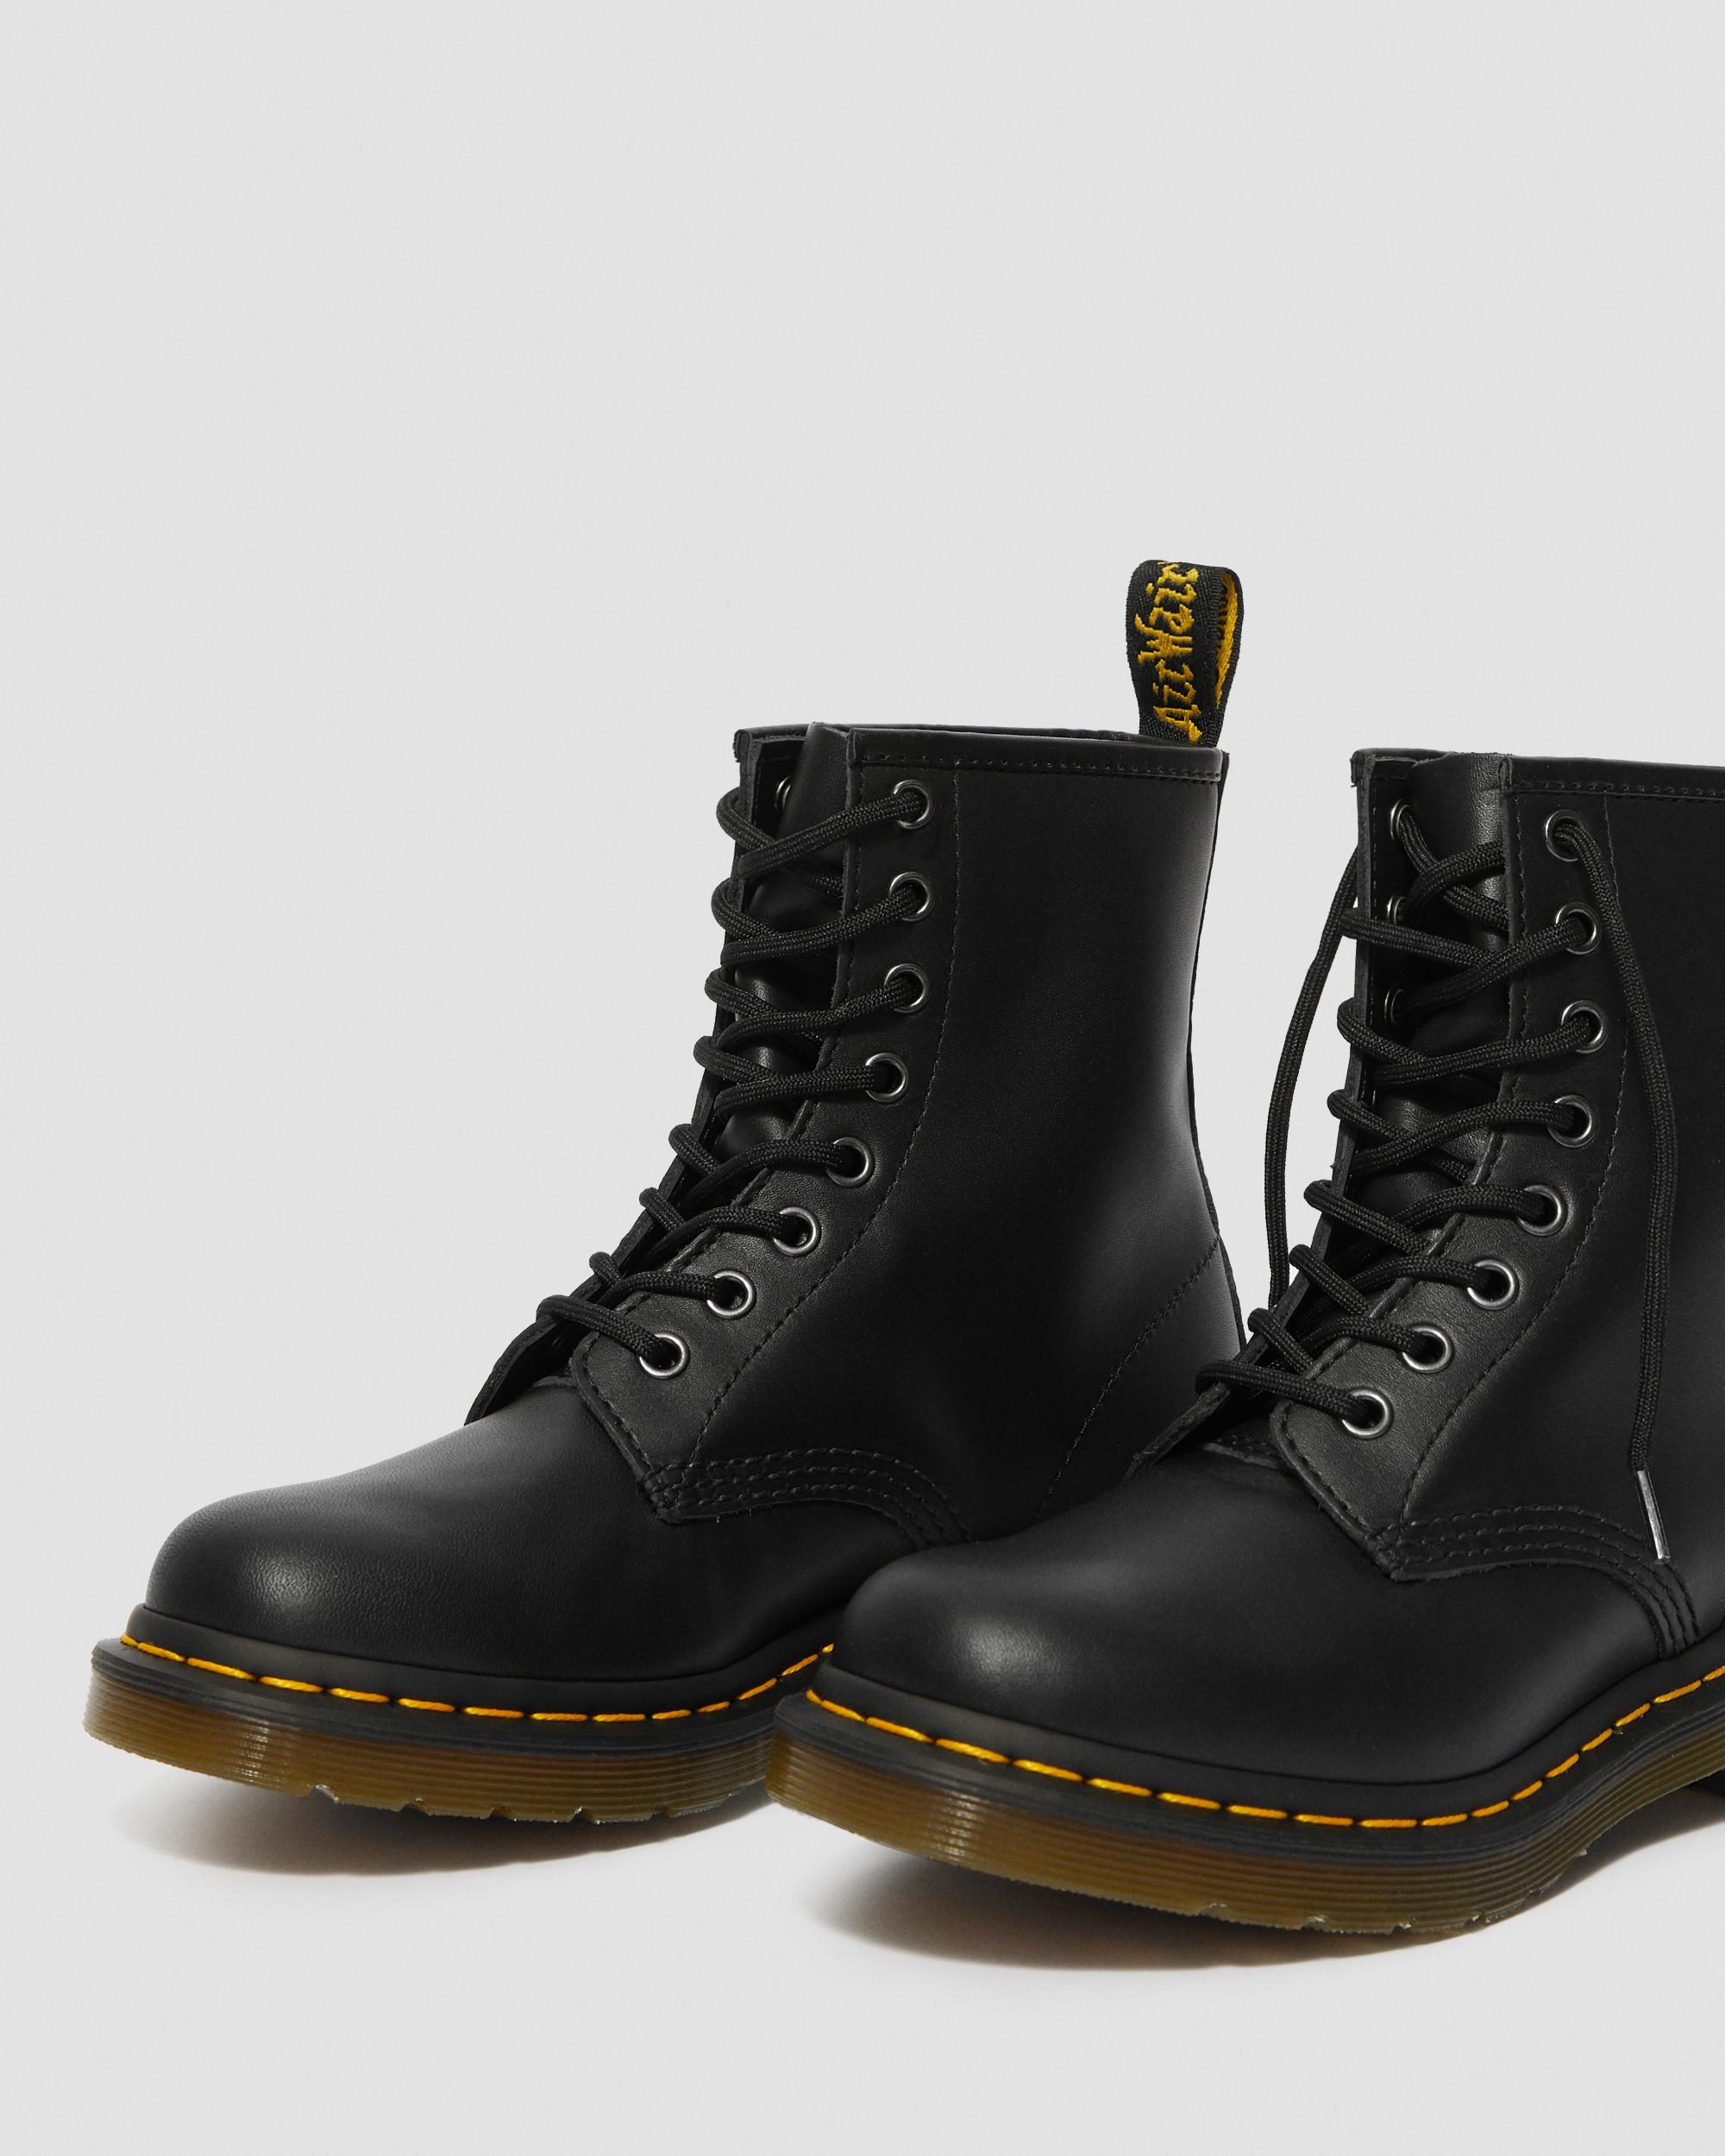 DR MARTENS 1460 Women's Nappa Leather Lace Up Boots